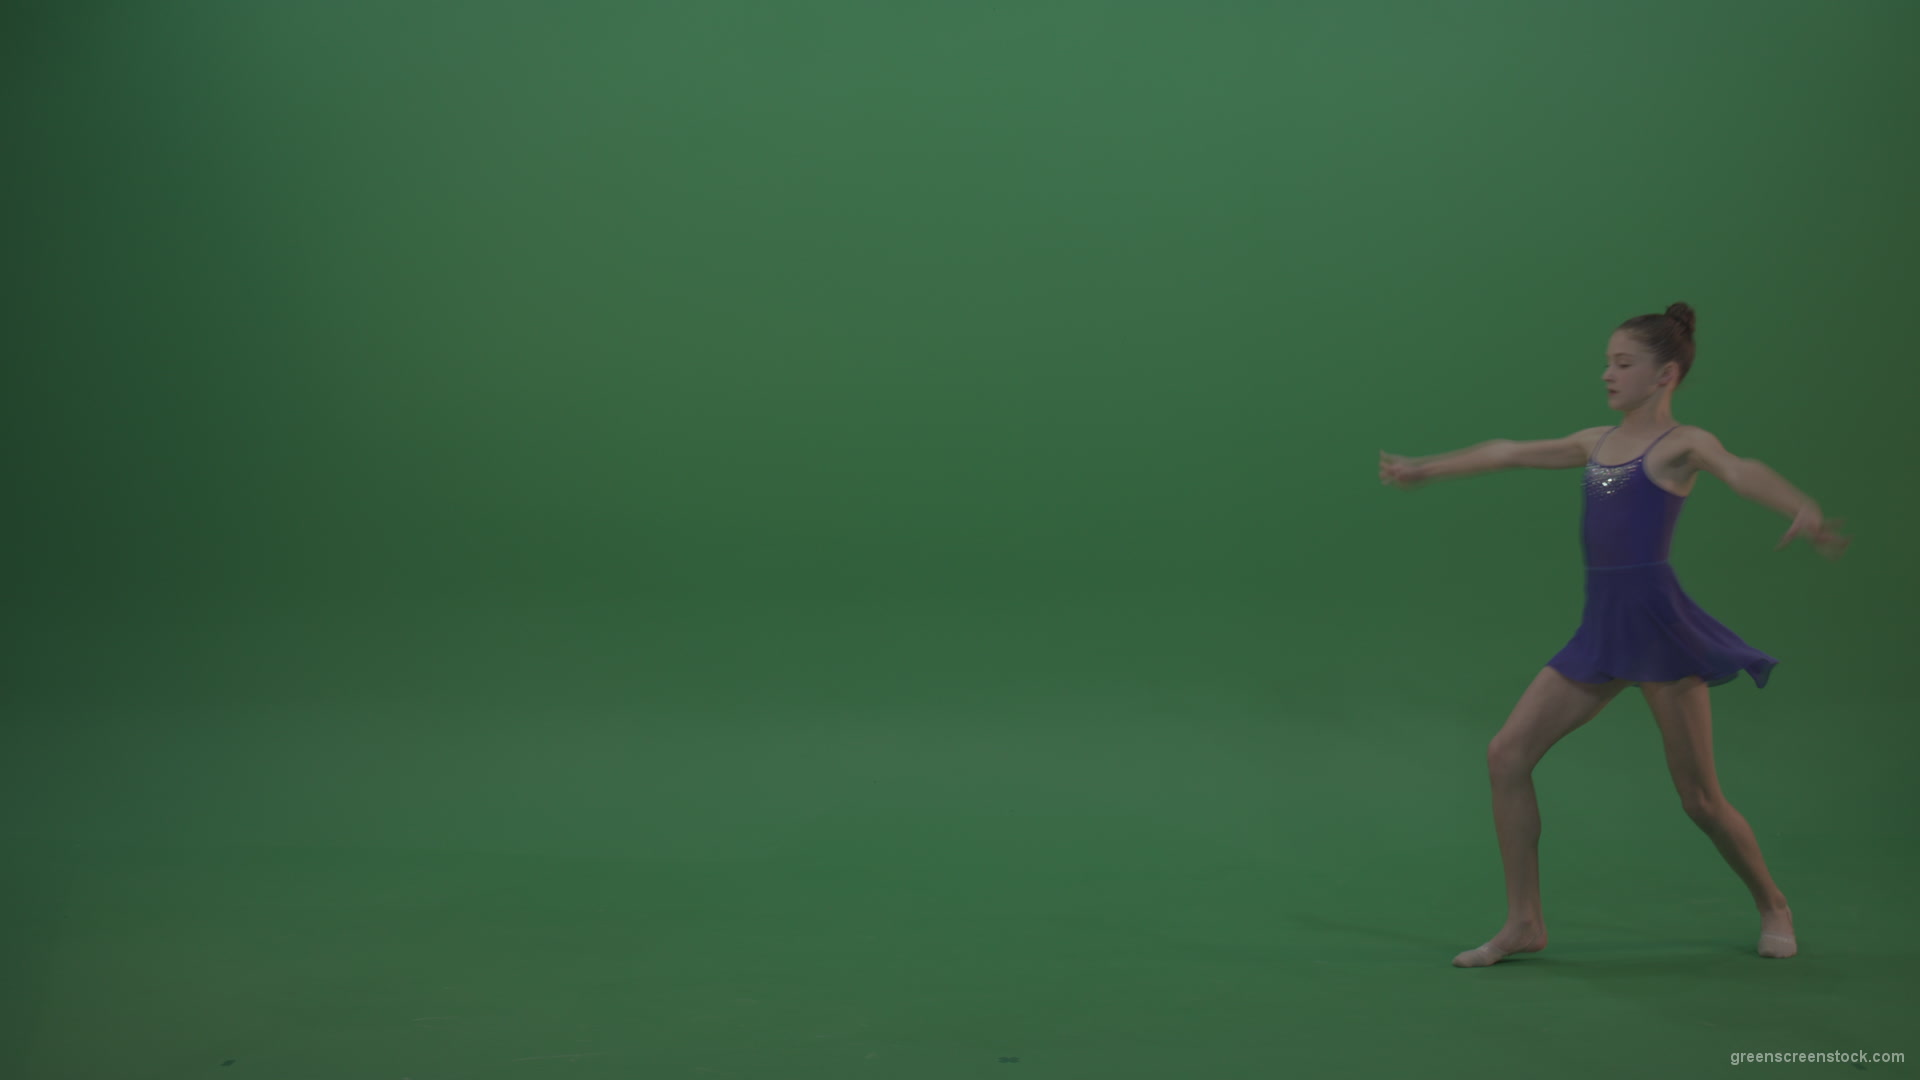 Young_Gymnast_Showing_Marvelous_Technical_Dance_Swan_Ballet_Moves_Technical_Performance_Of_Rhythmic_Artistic_Gymnastics_On_Green_Screen_Wall_Background_002 Green Screen Stock